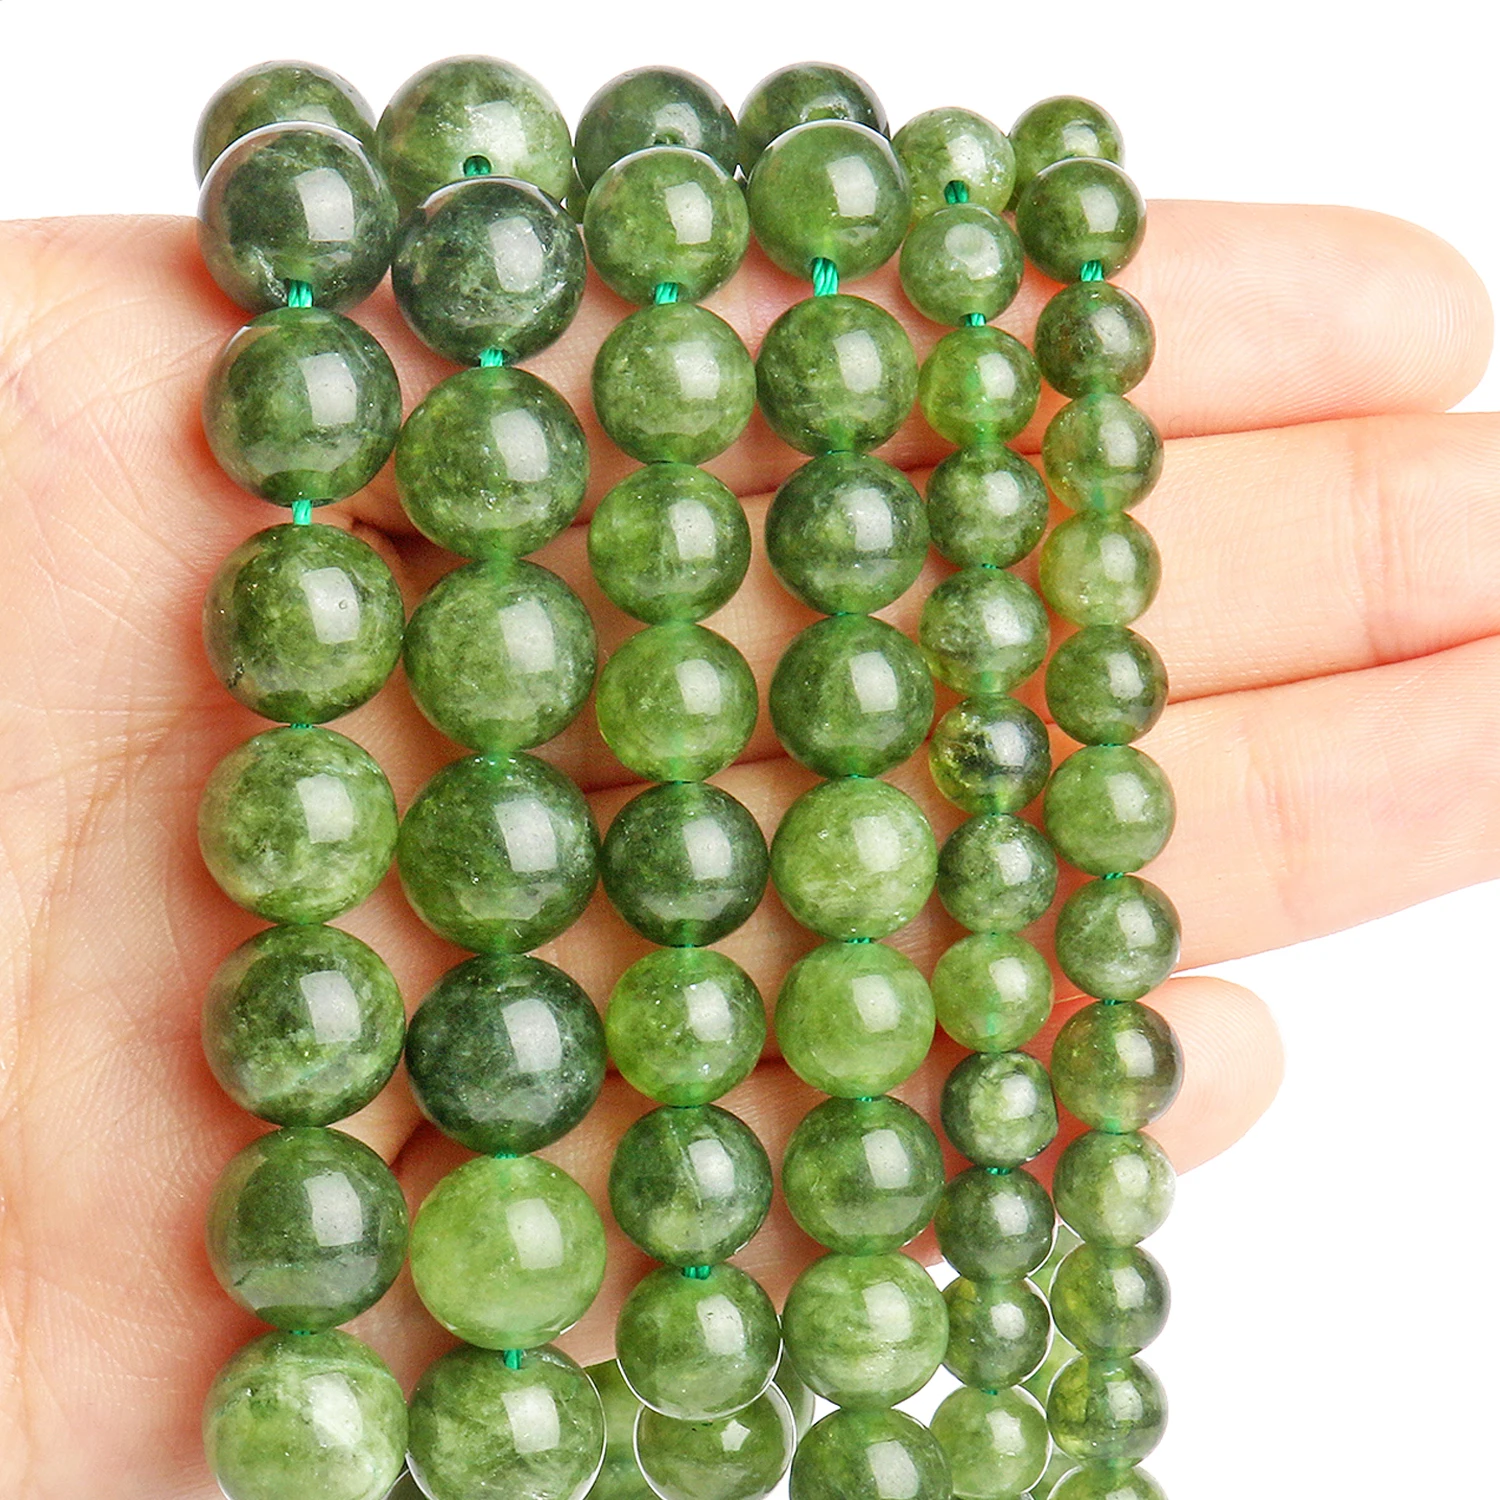 6/8/10mm High Quality Natural Stone Emerald Green Jade Bead Round Smooth Loose Beads for Jewelry Making Handmade Bracelets 15''